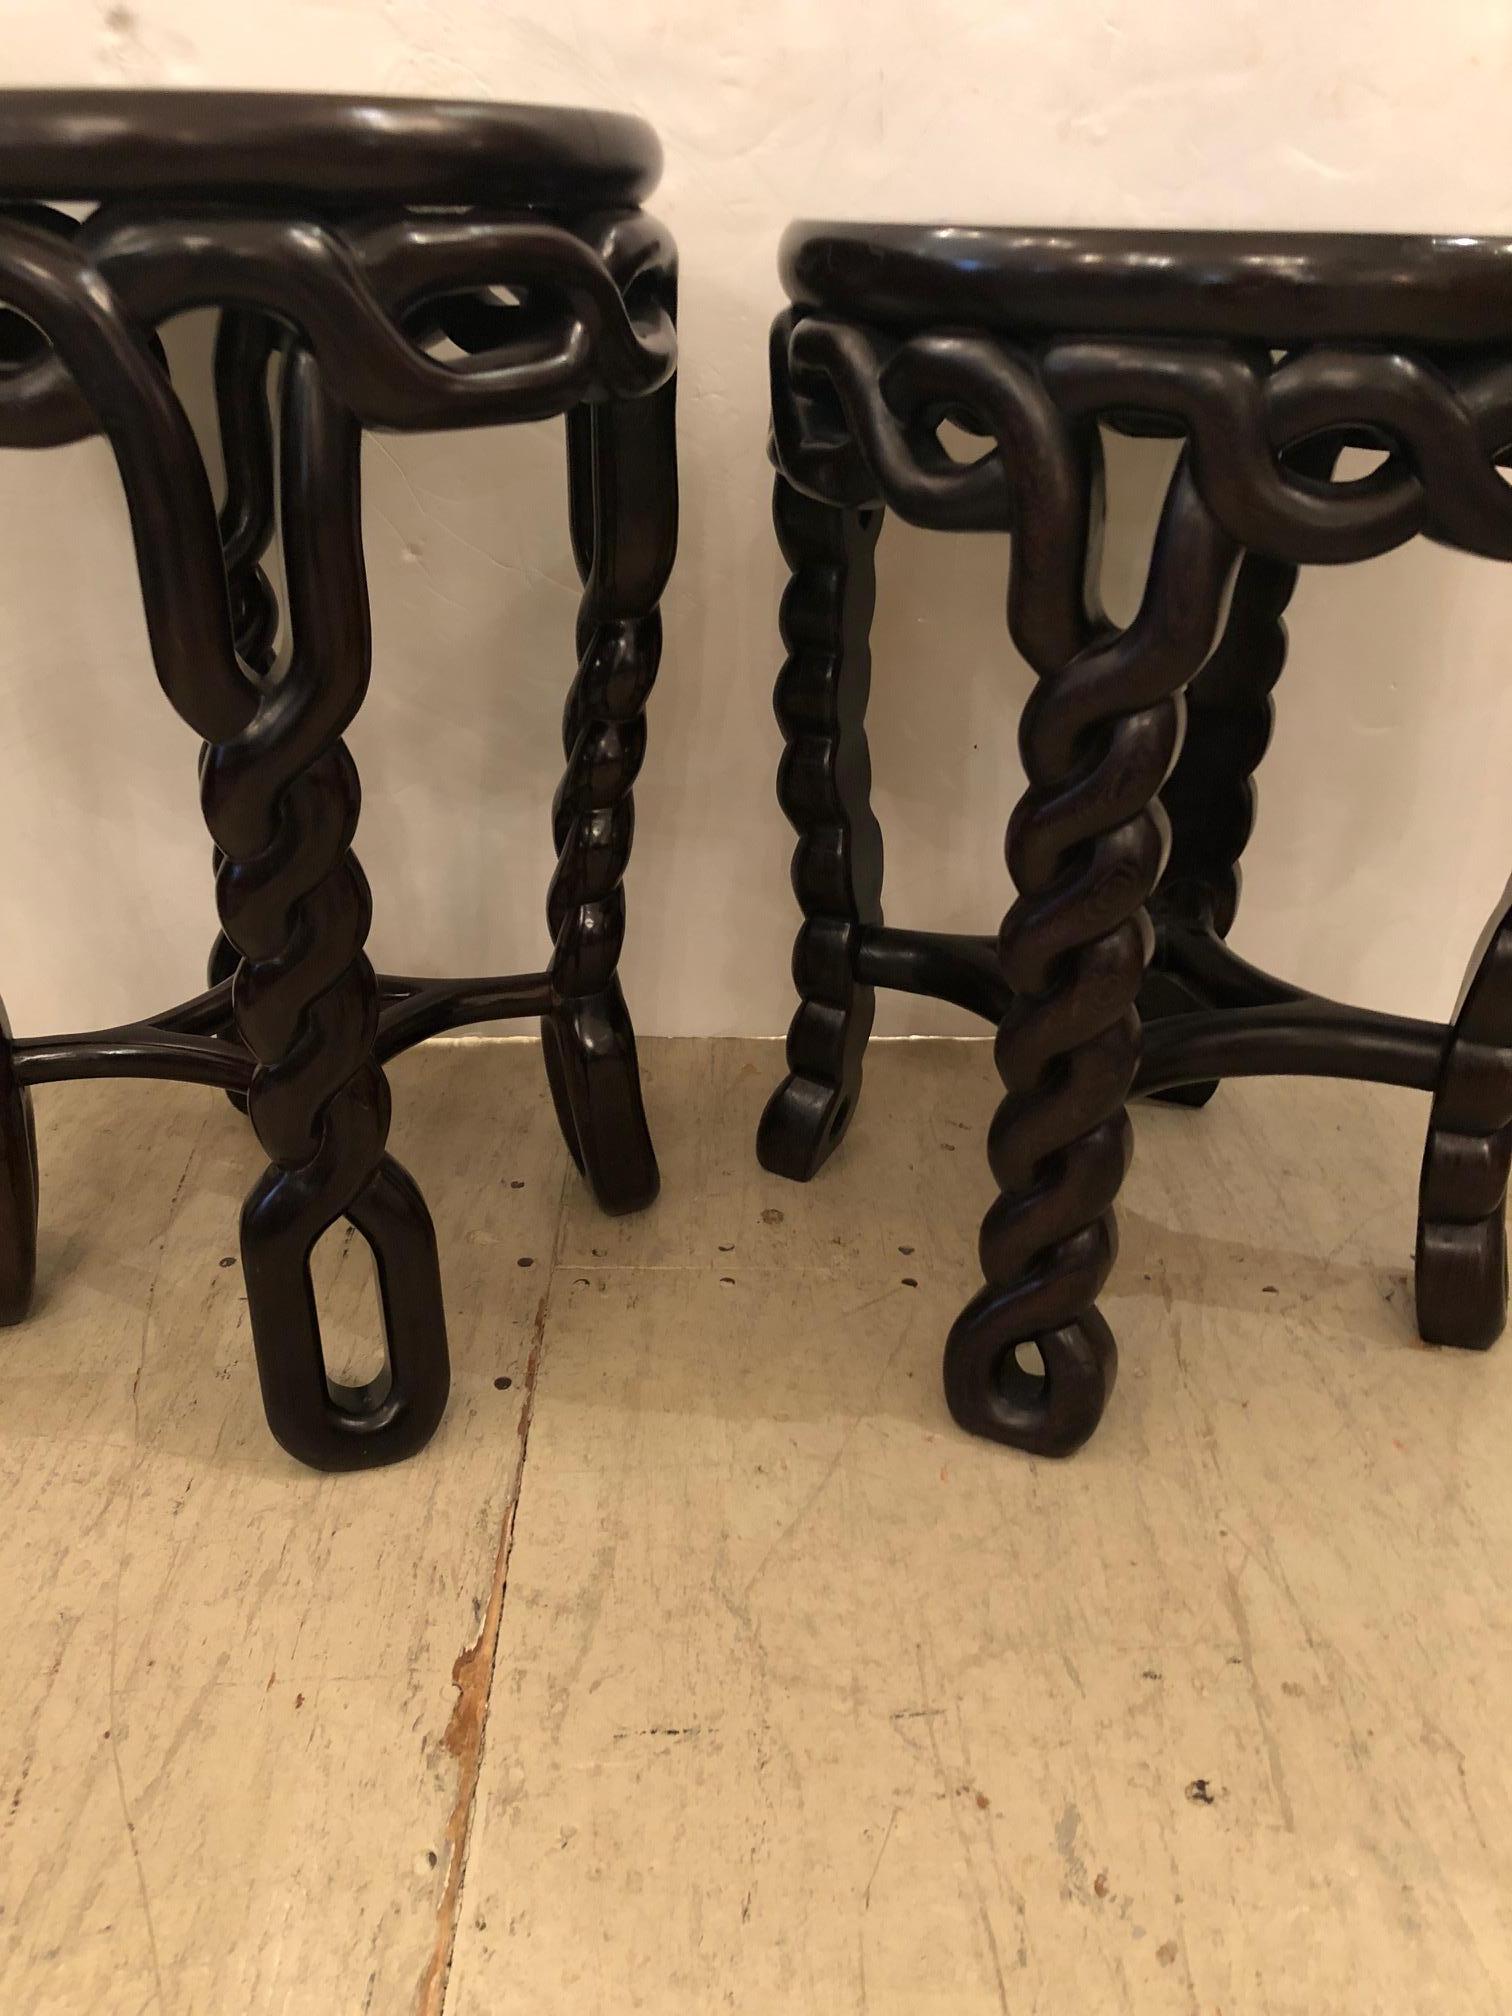 A stunning pair of exotic wood round side or end tables with slightly varying braided rope motife legs, one table is an inch higher -18 inches and 19 inches. They are very solid, heavy and beautifully hand carved wood with a dark finish.
The wood